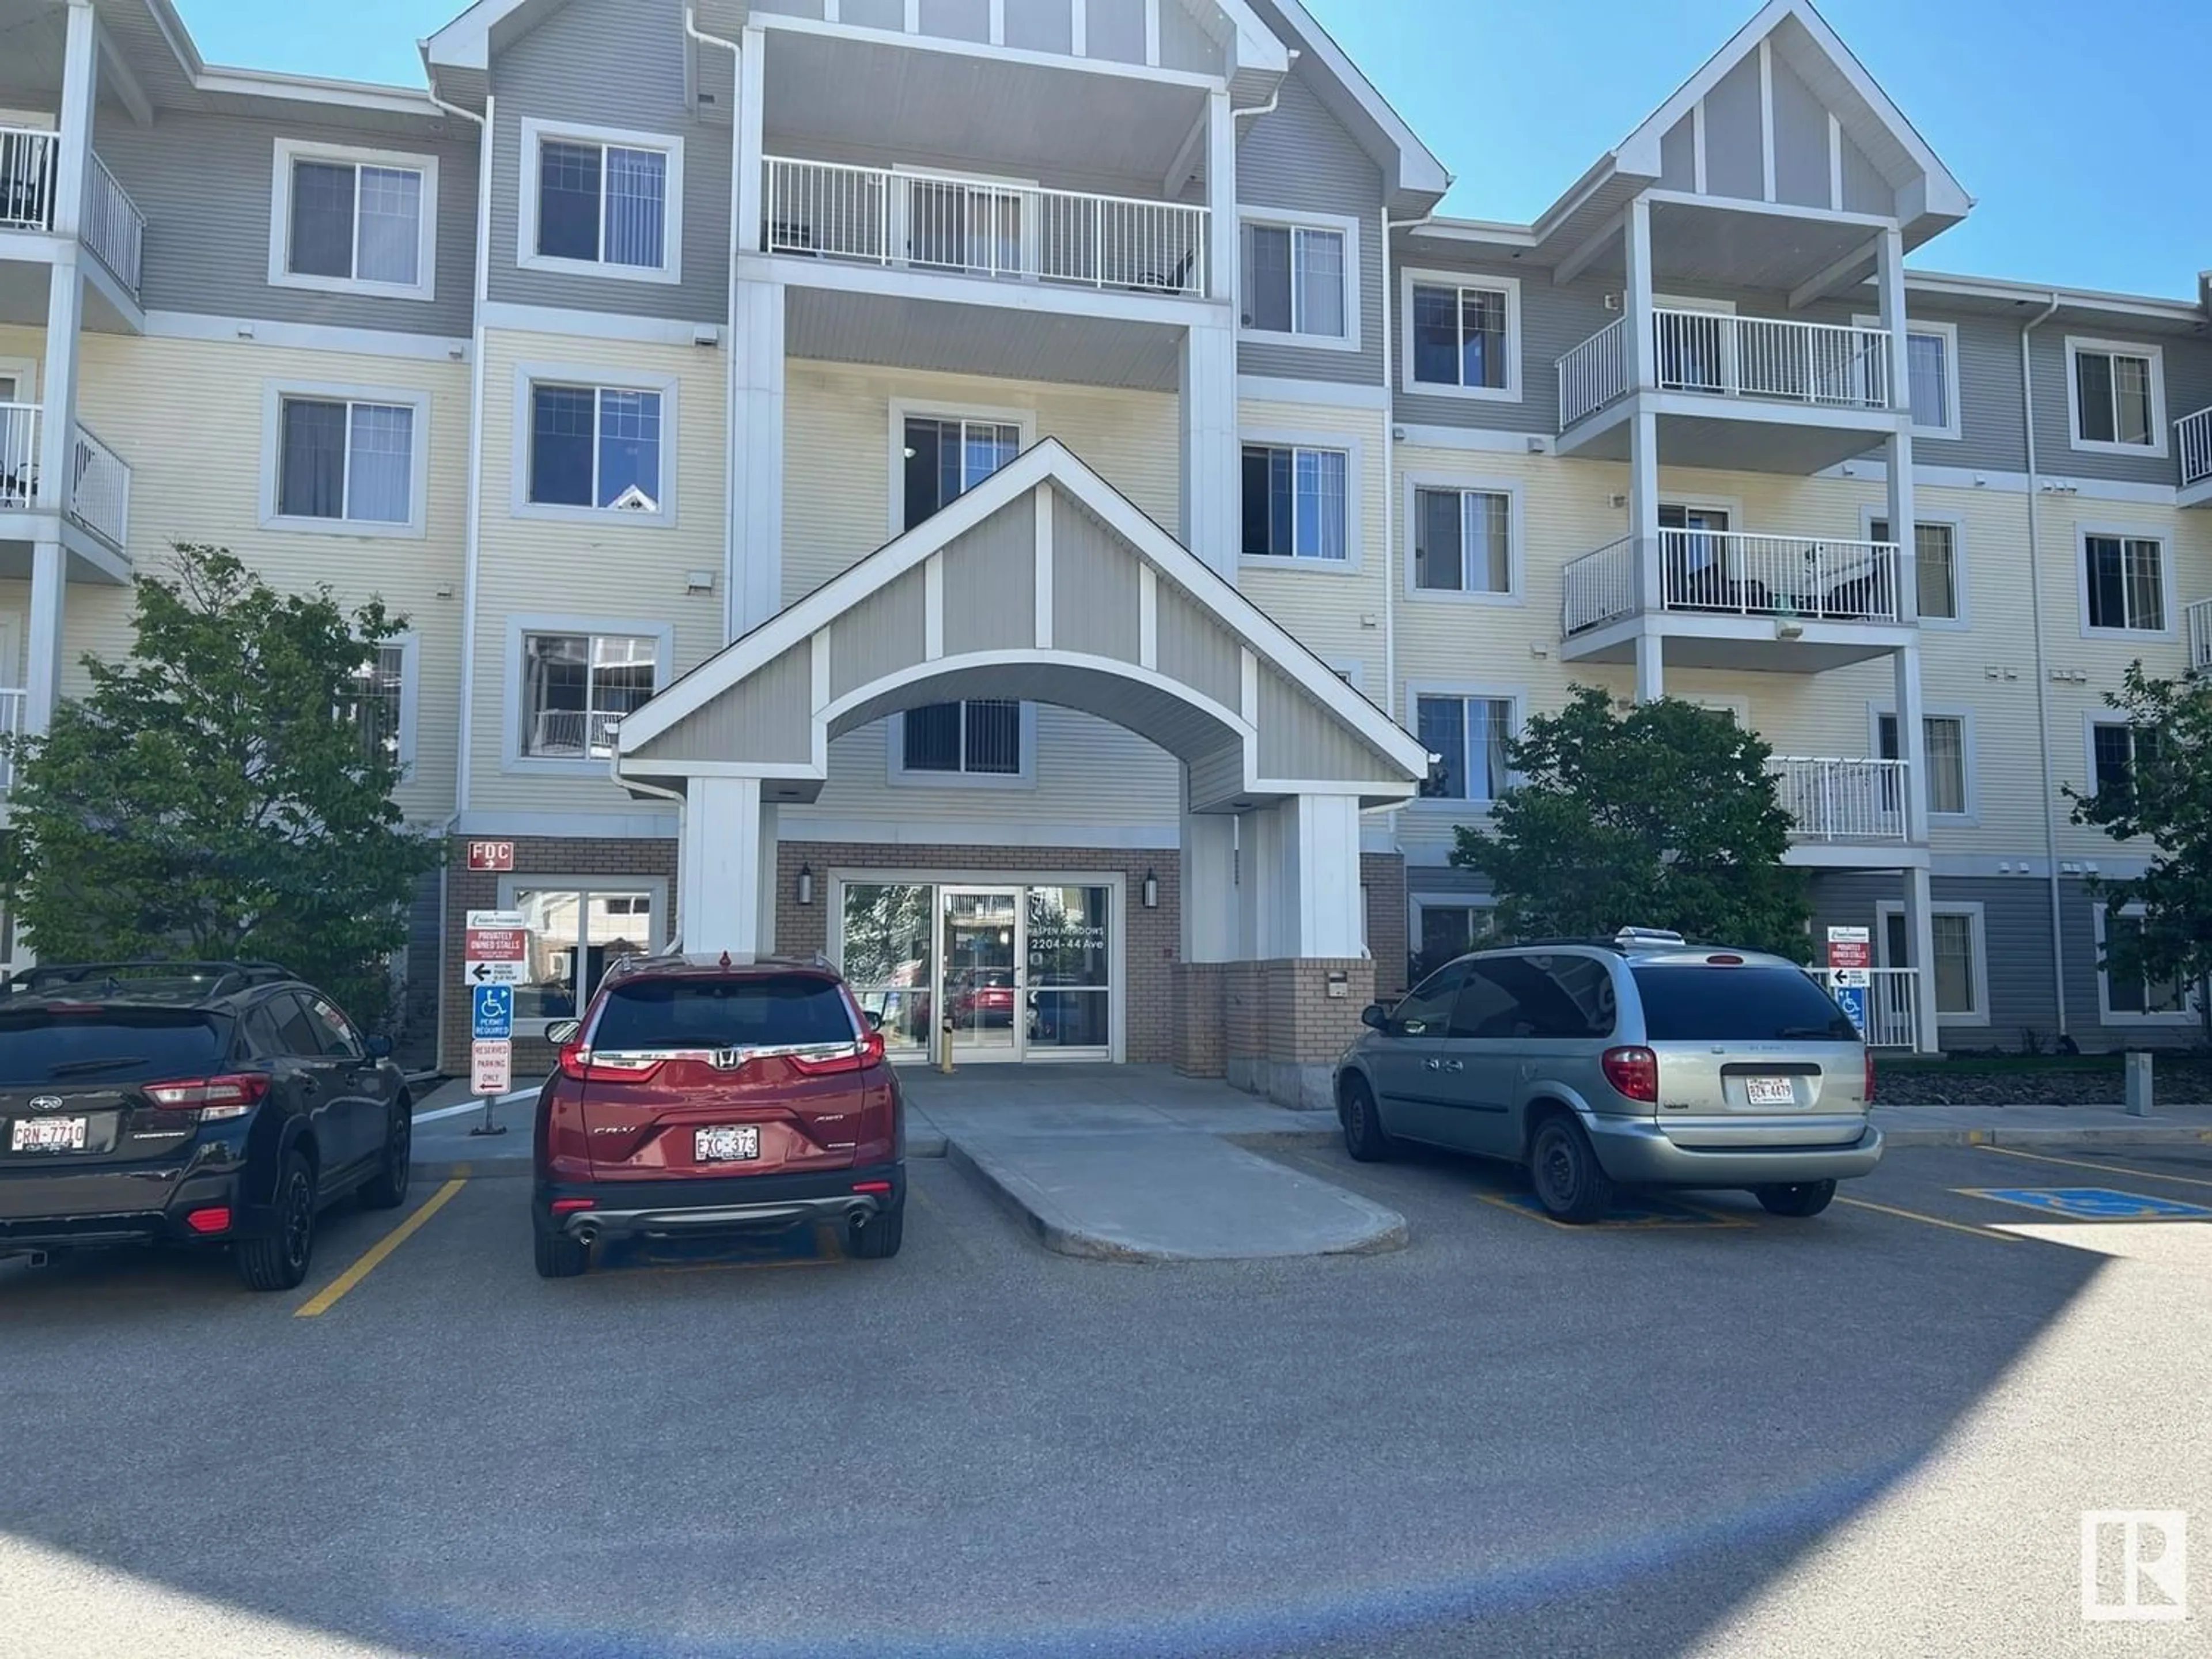 A pic from exterior of the house or condo for #304 2204 44 AV NW, Edmonton Alberta T6G0G5